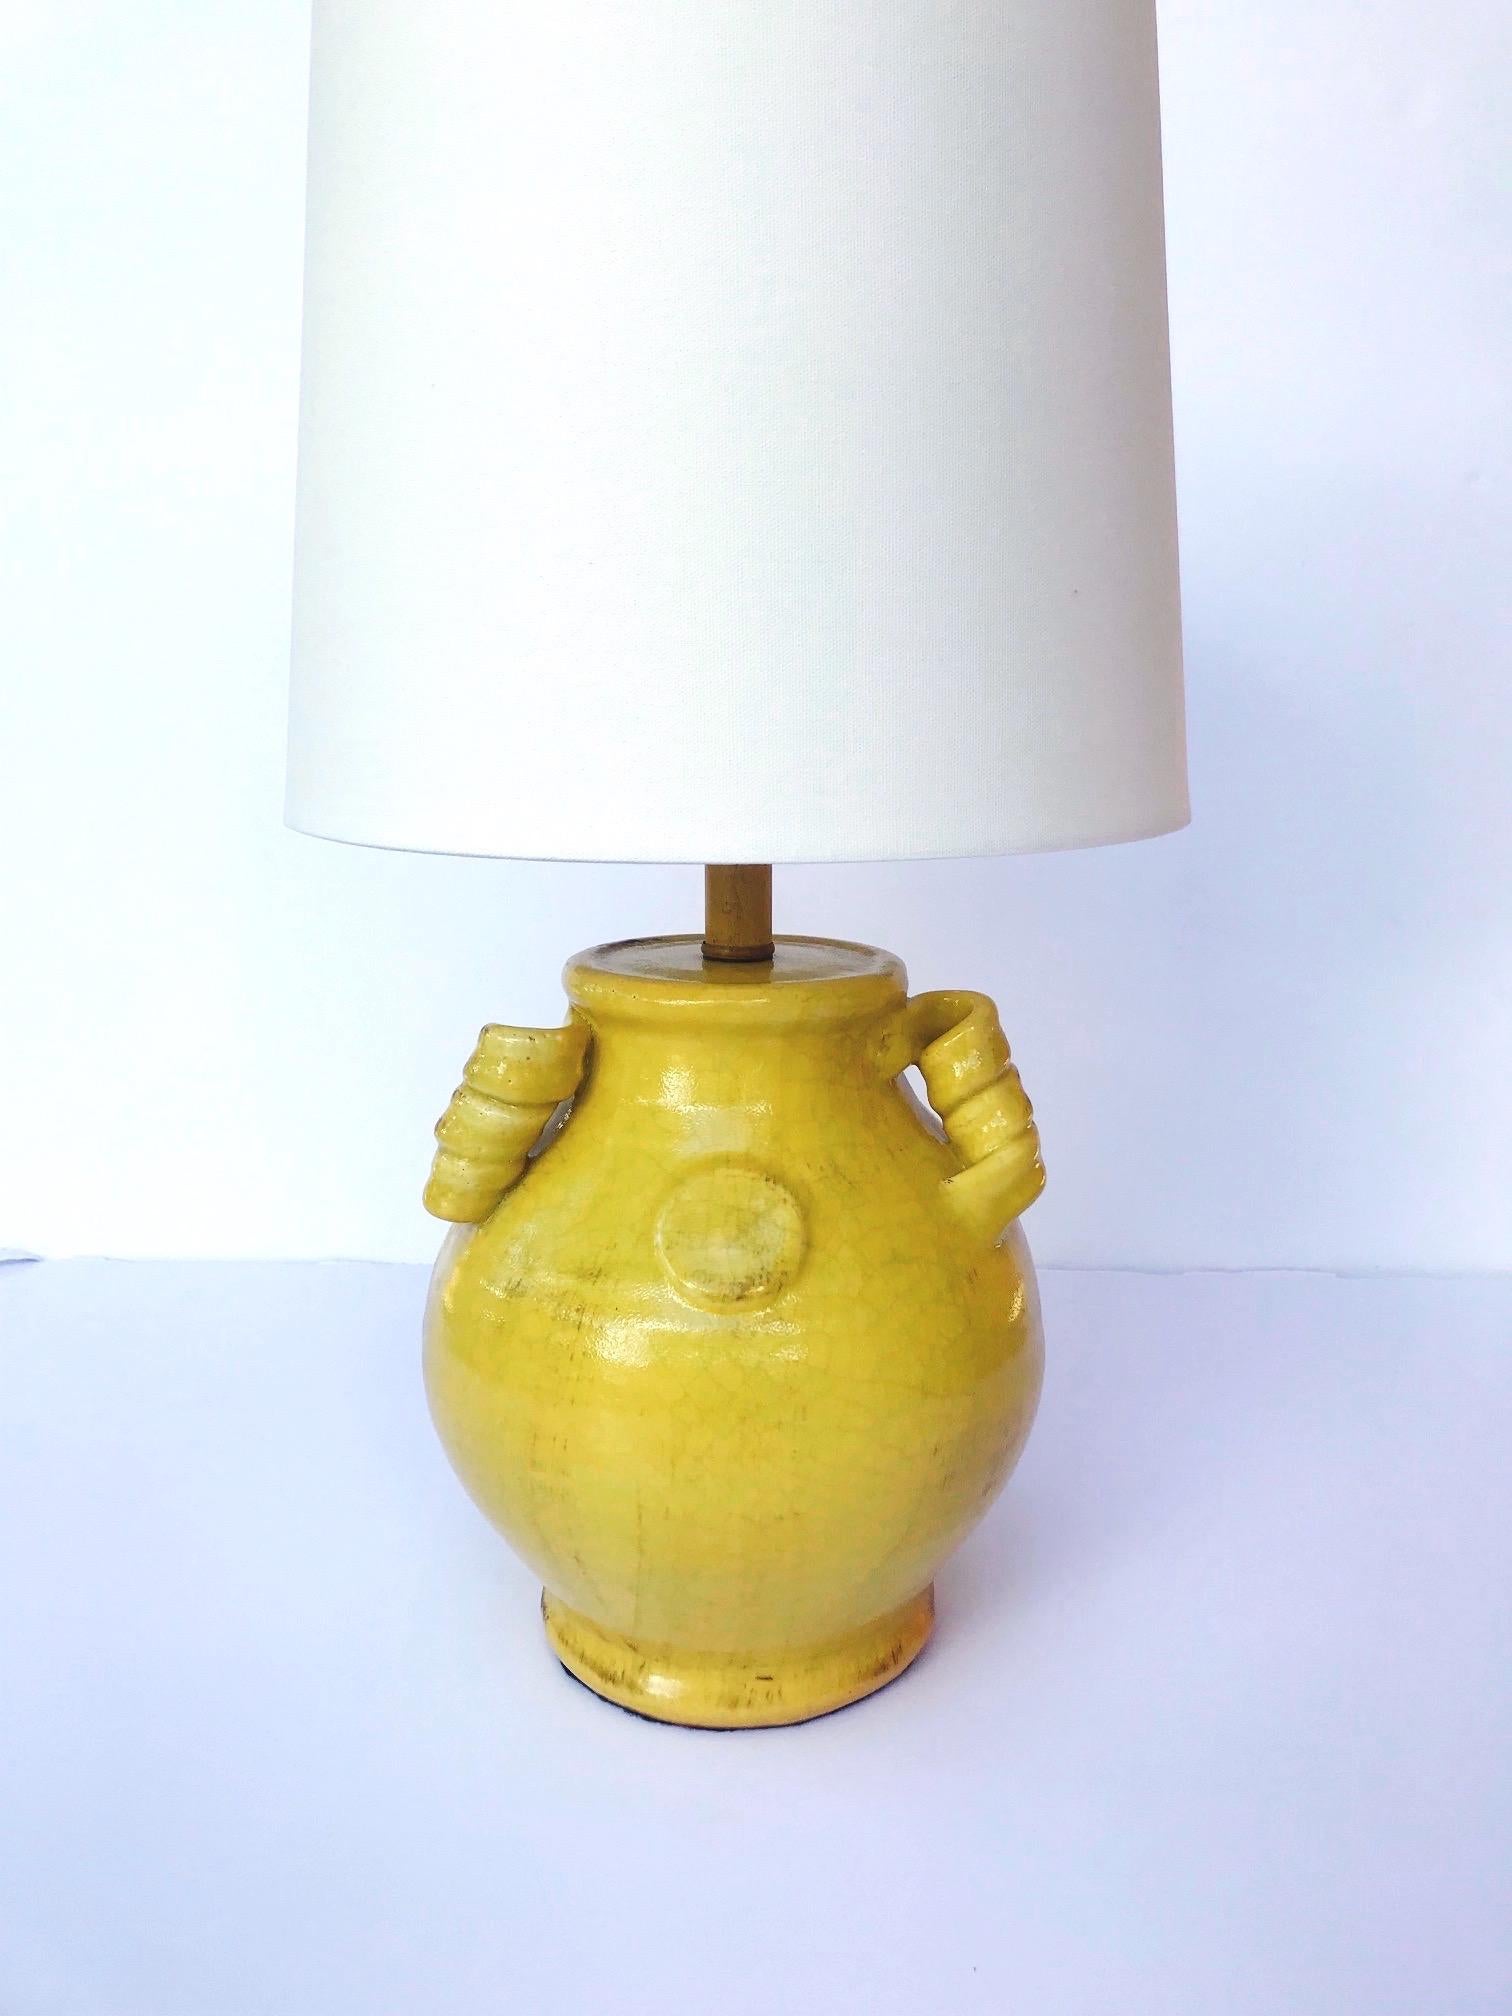 Ceramic Pair of Vintage Chinese Pottery Lamps with Antique Yellow Glaze, c. 1980's